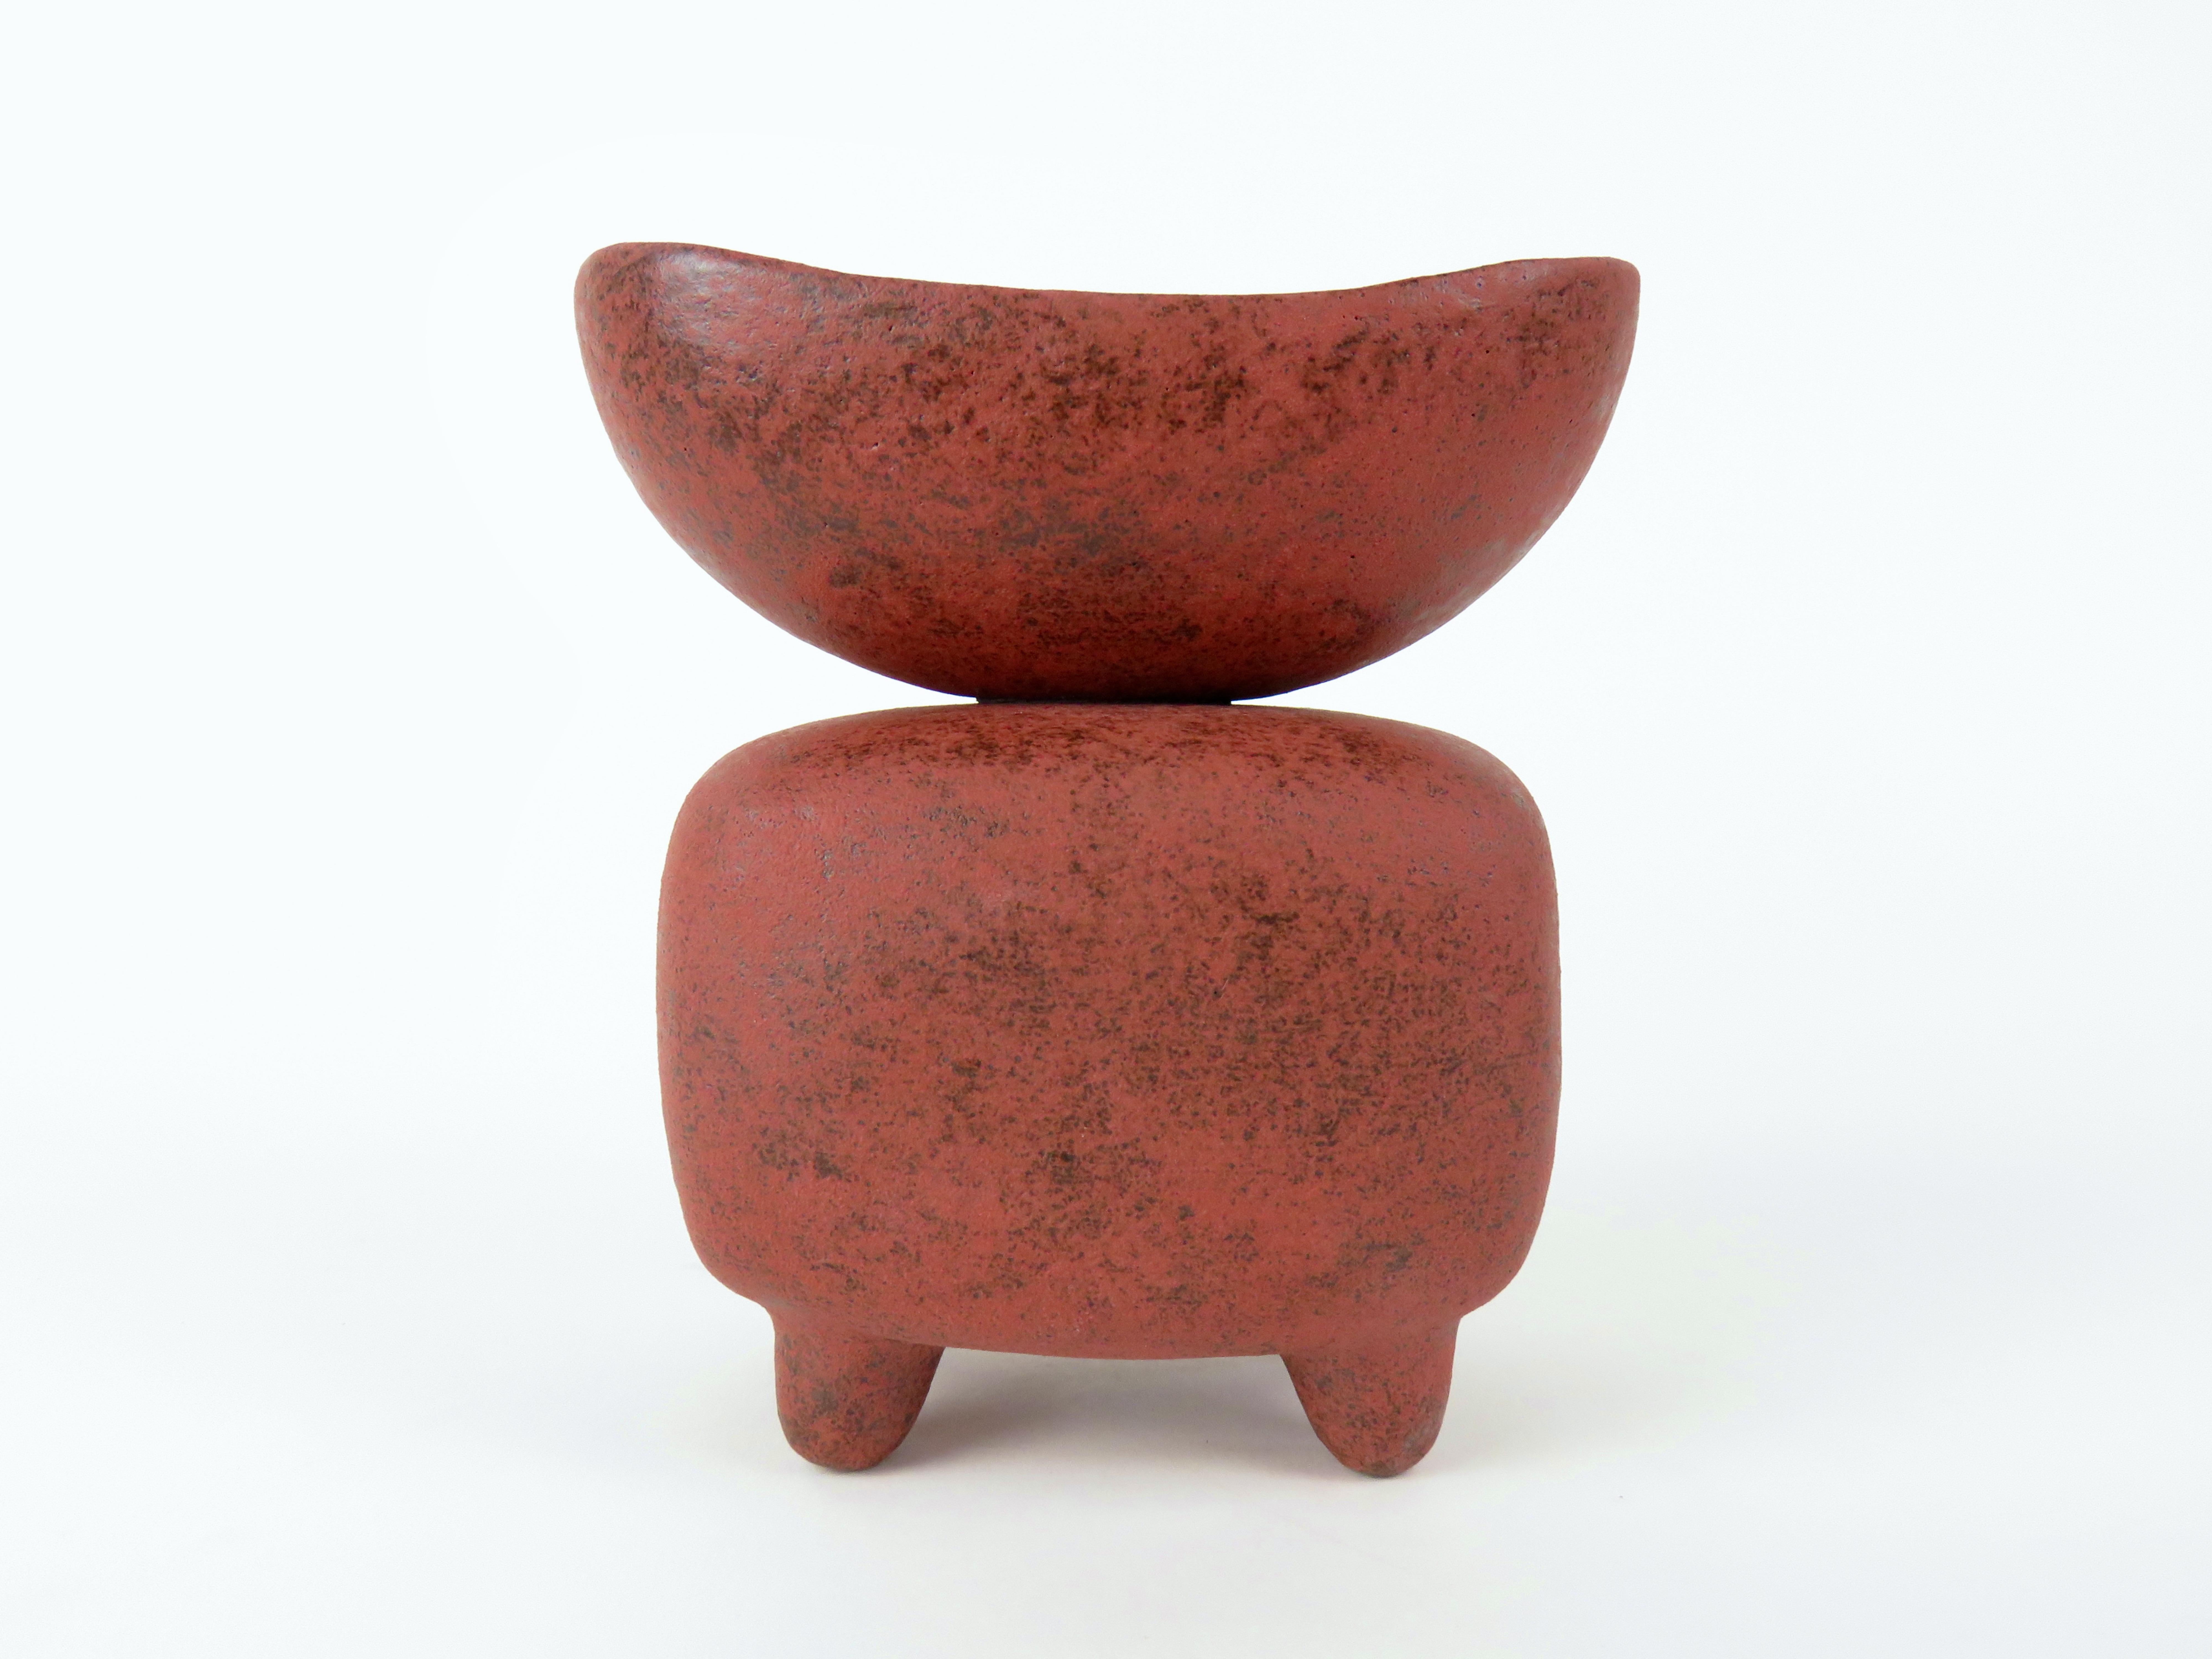 Mottled Red Ceramic Sculpture, Wide Oval Cup on Rounded Cube, Hand Built  2